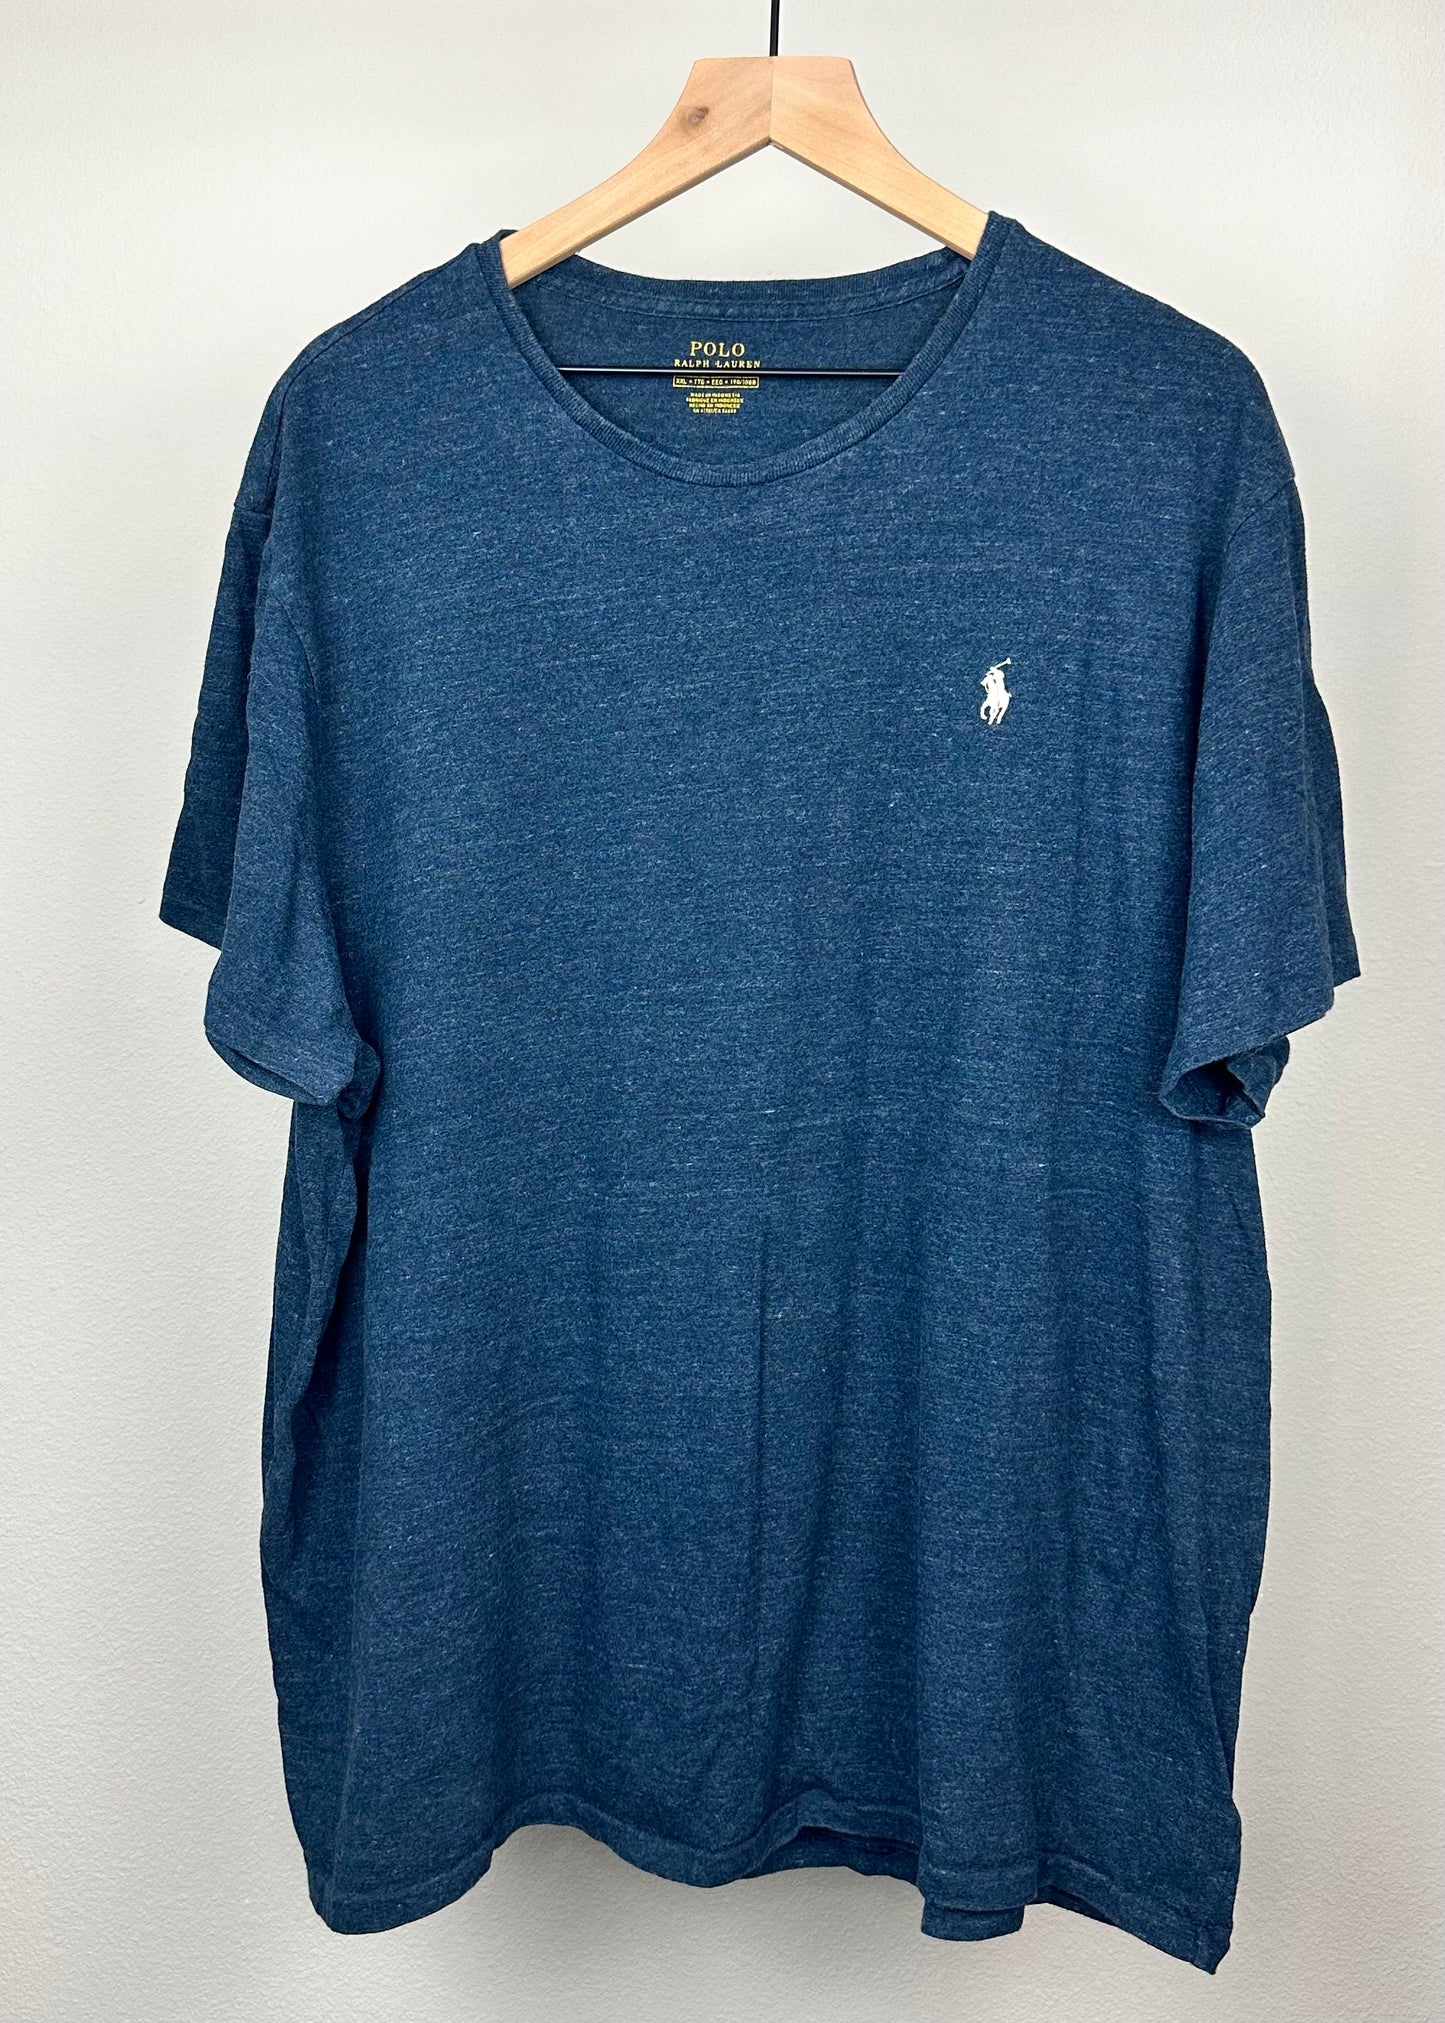 Mens Blue Shirt By Polo